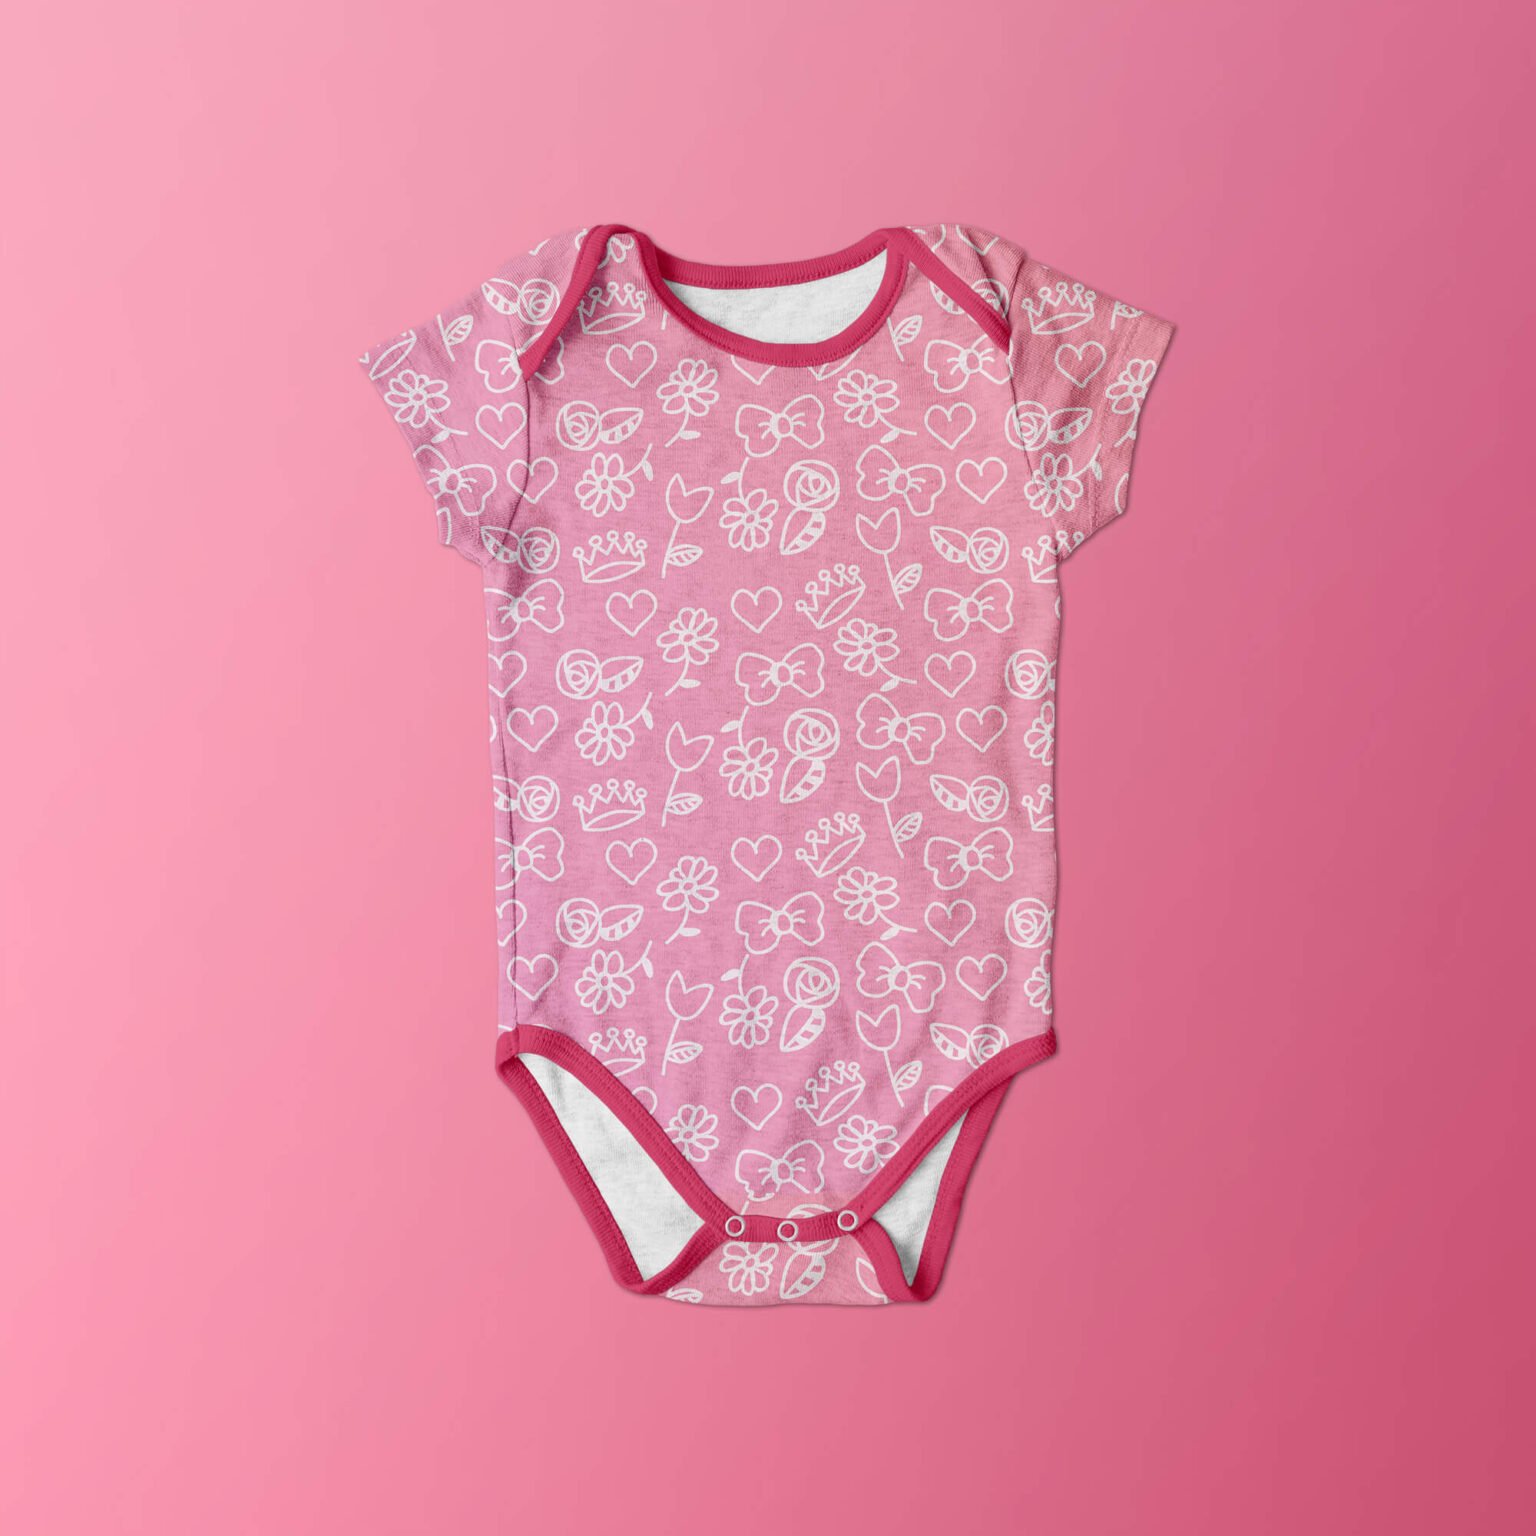 Download Free Baby Clothes Mockup PSD Template - Mockup Den